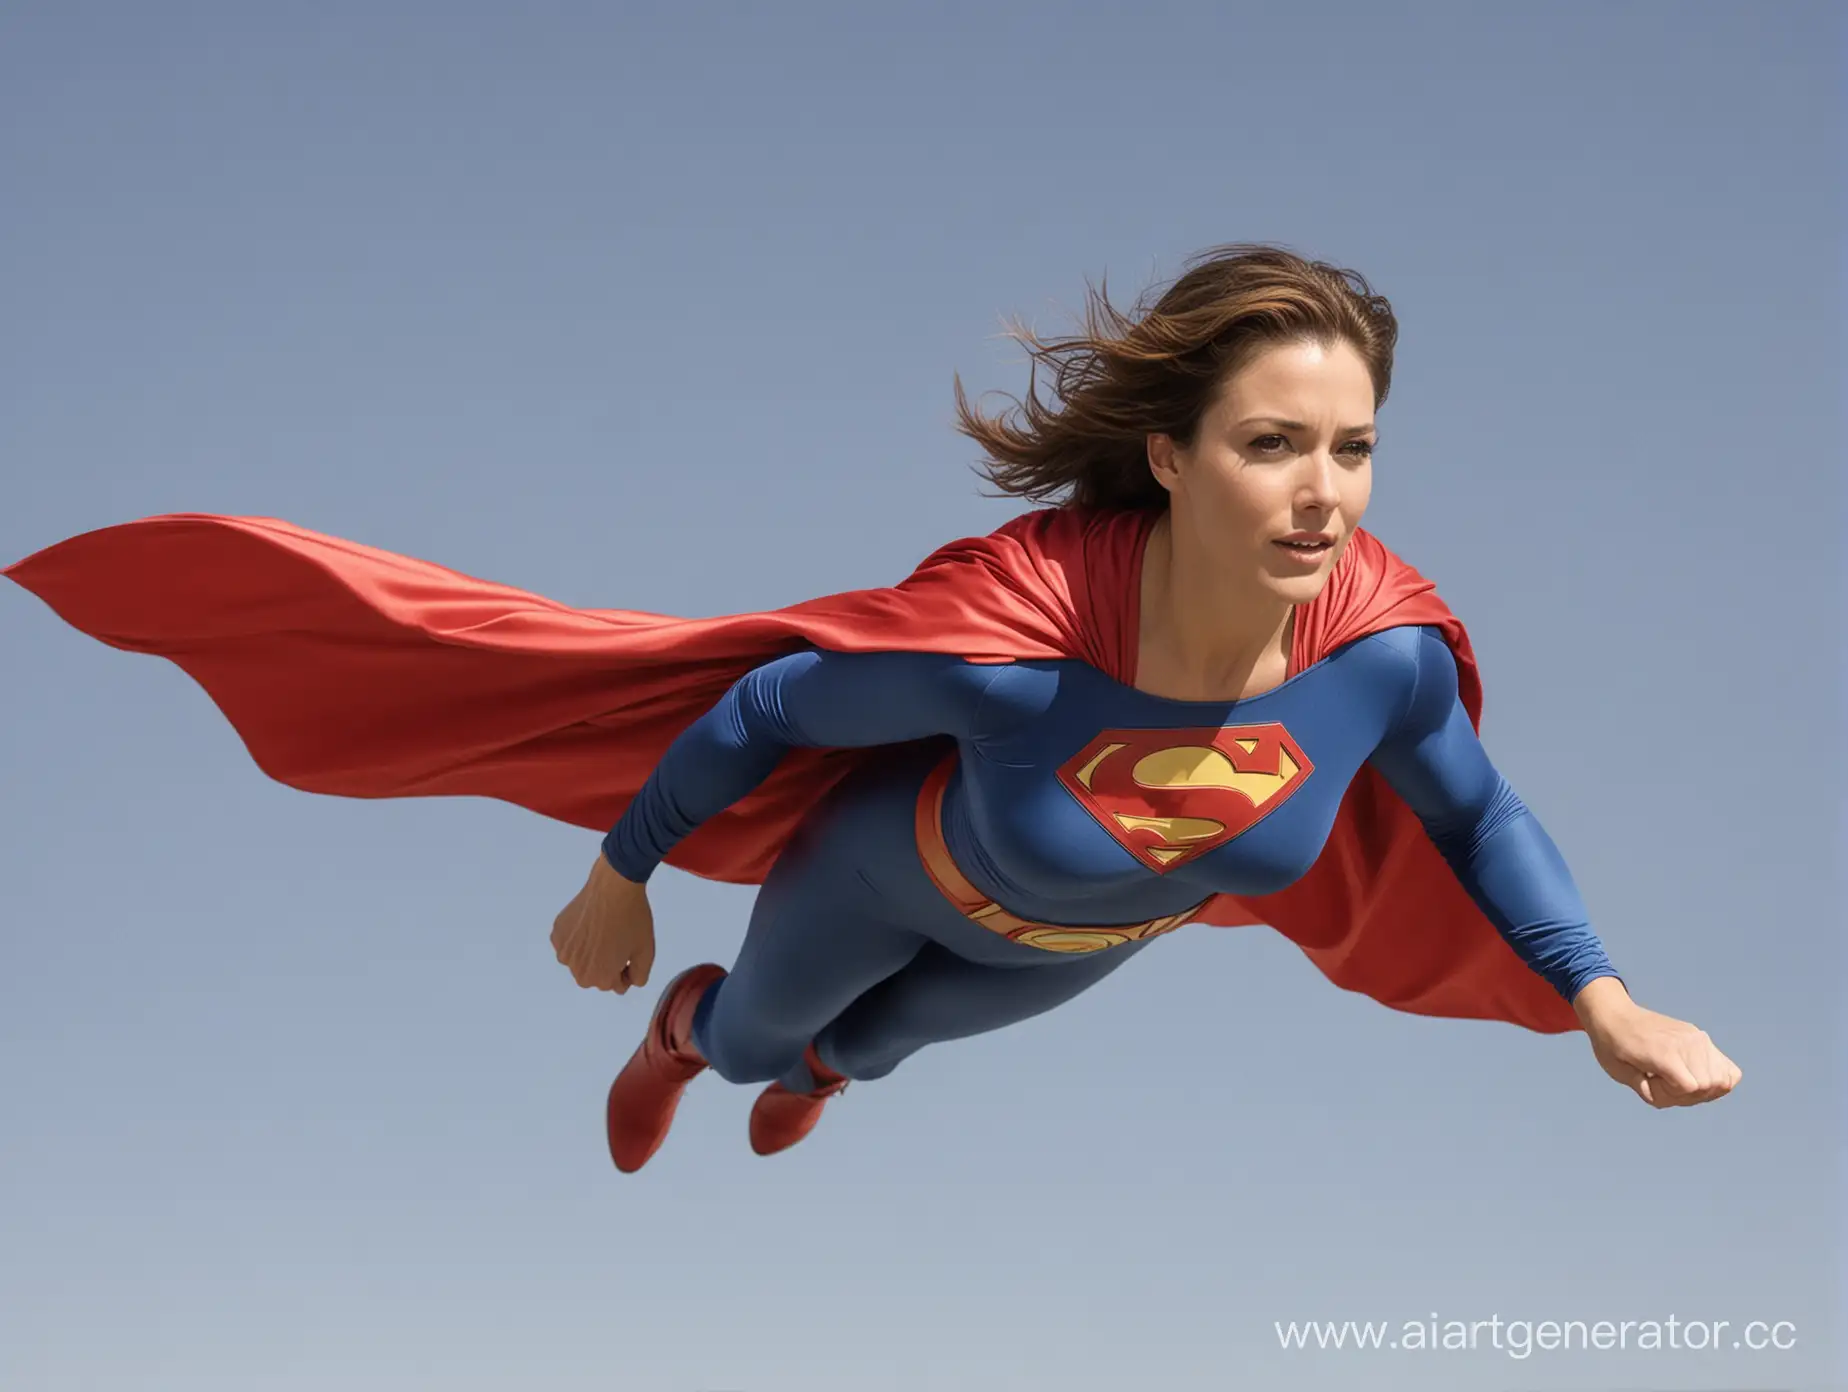 A beautiful woman with brown hair, age 45, She is flying like Superman, she is wearing the classic Superman costume from "Superman The Movie"